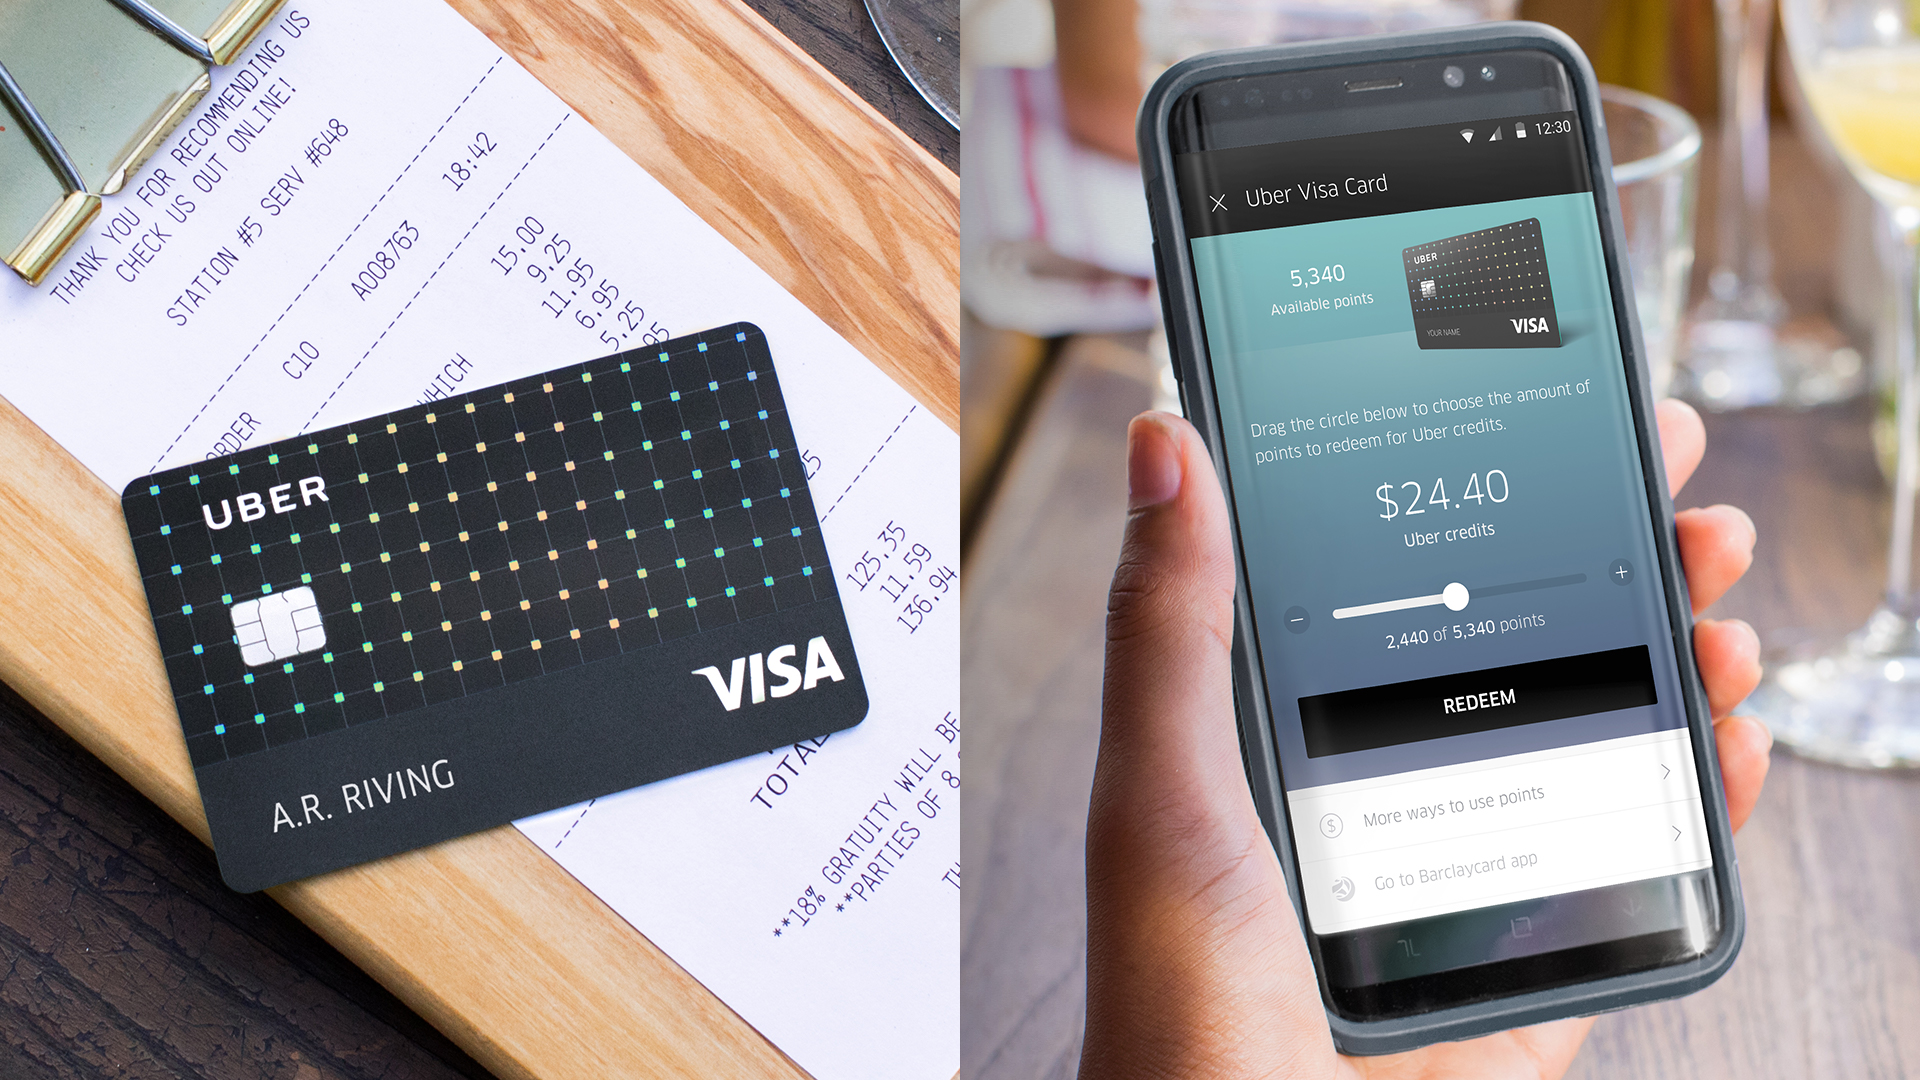 5 reasons why you're getting Uber's new credit card